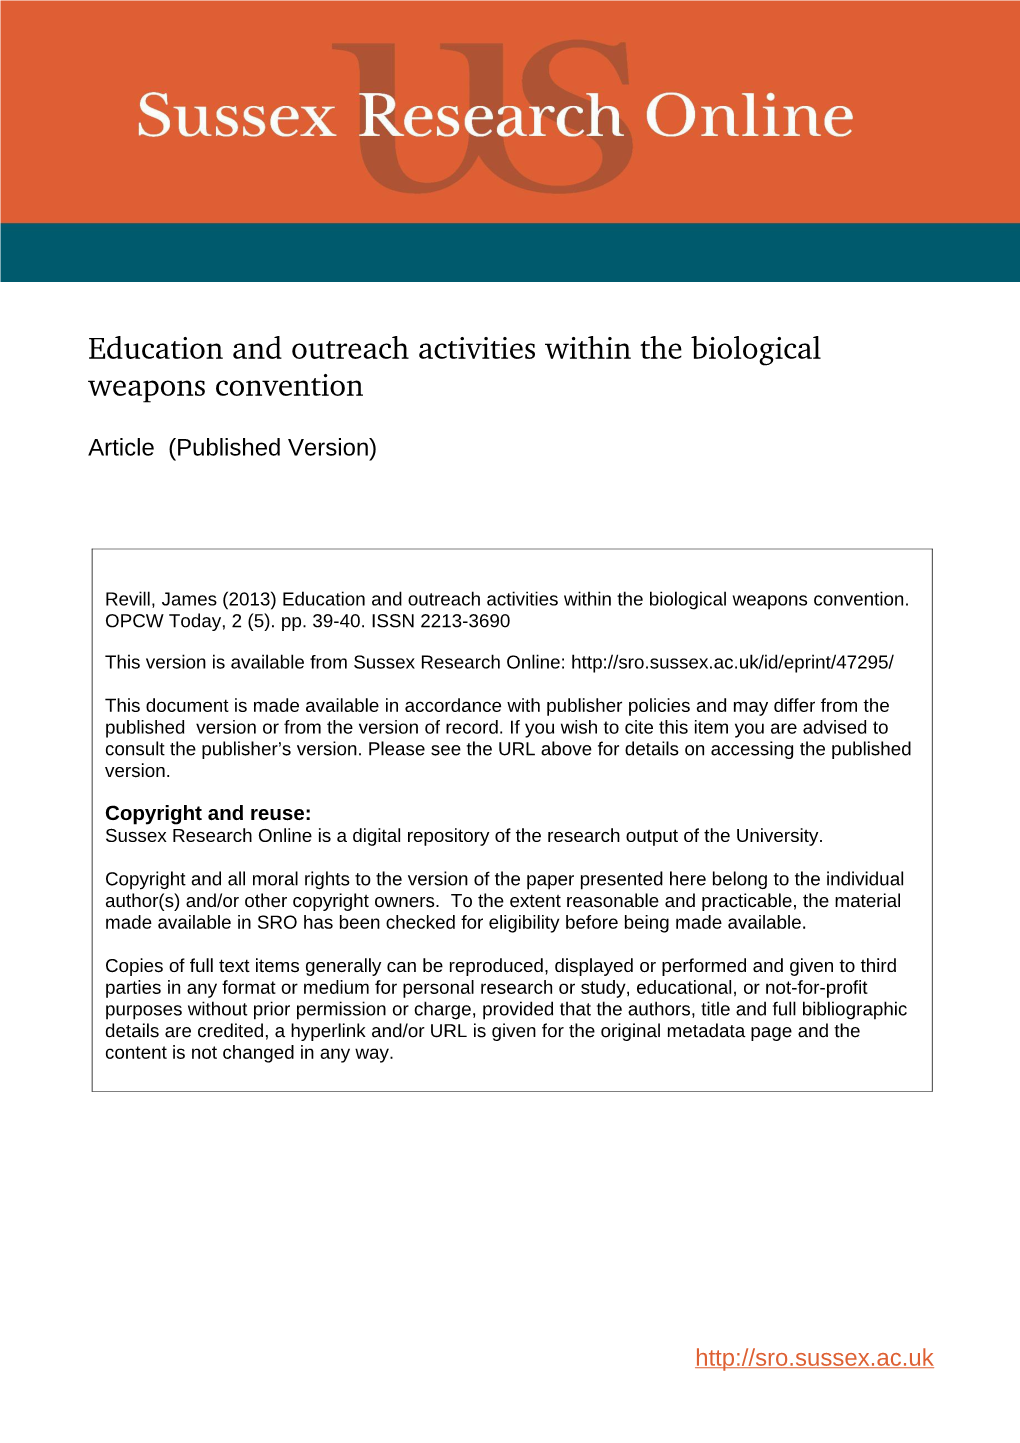 Education and Outreach Activities Within the Biological Weapons Convention